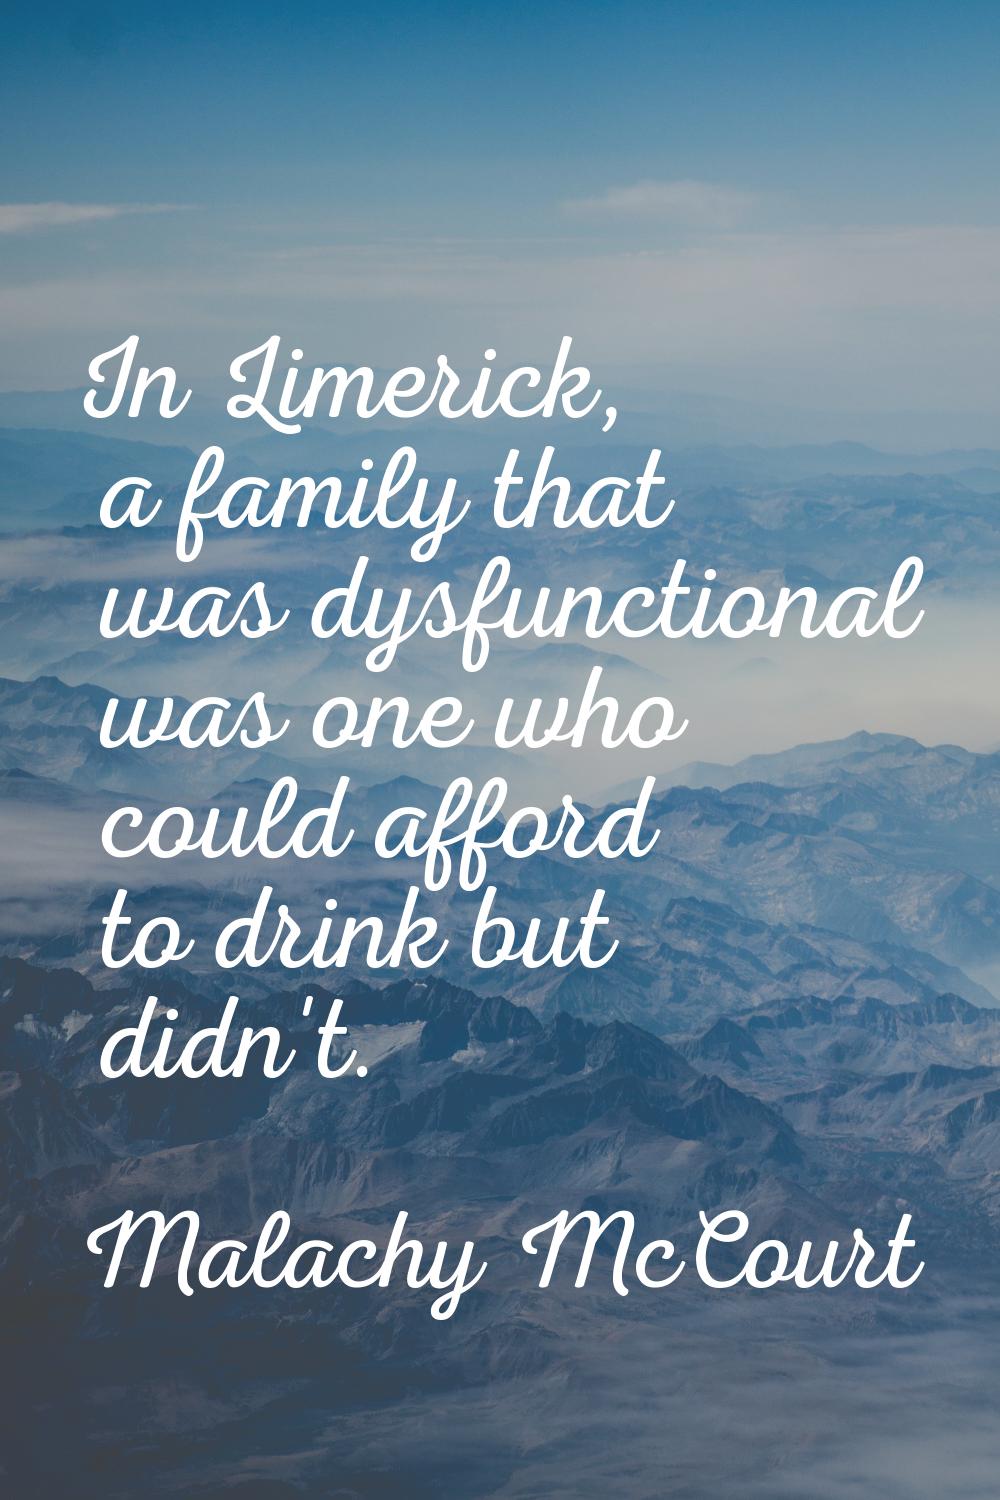 In Limerick, a family that was dysfunctional was one who could afford to drink but didn't.